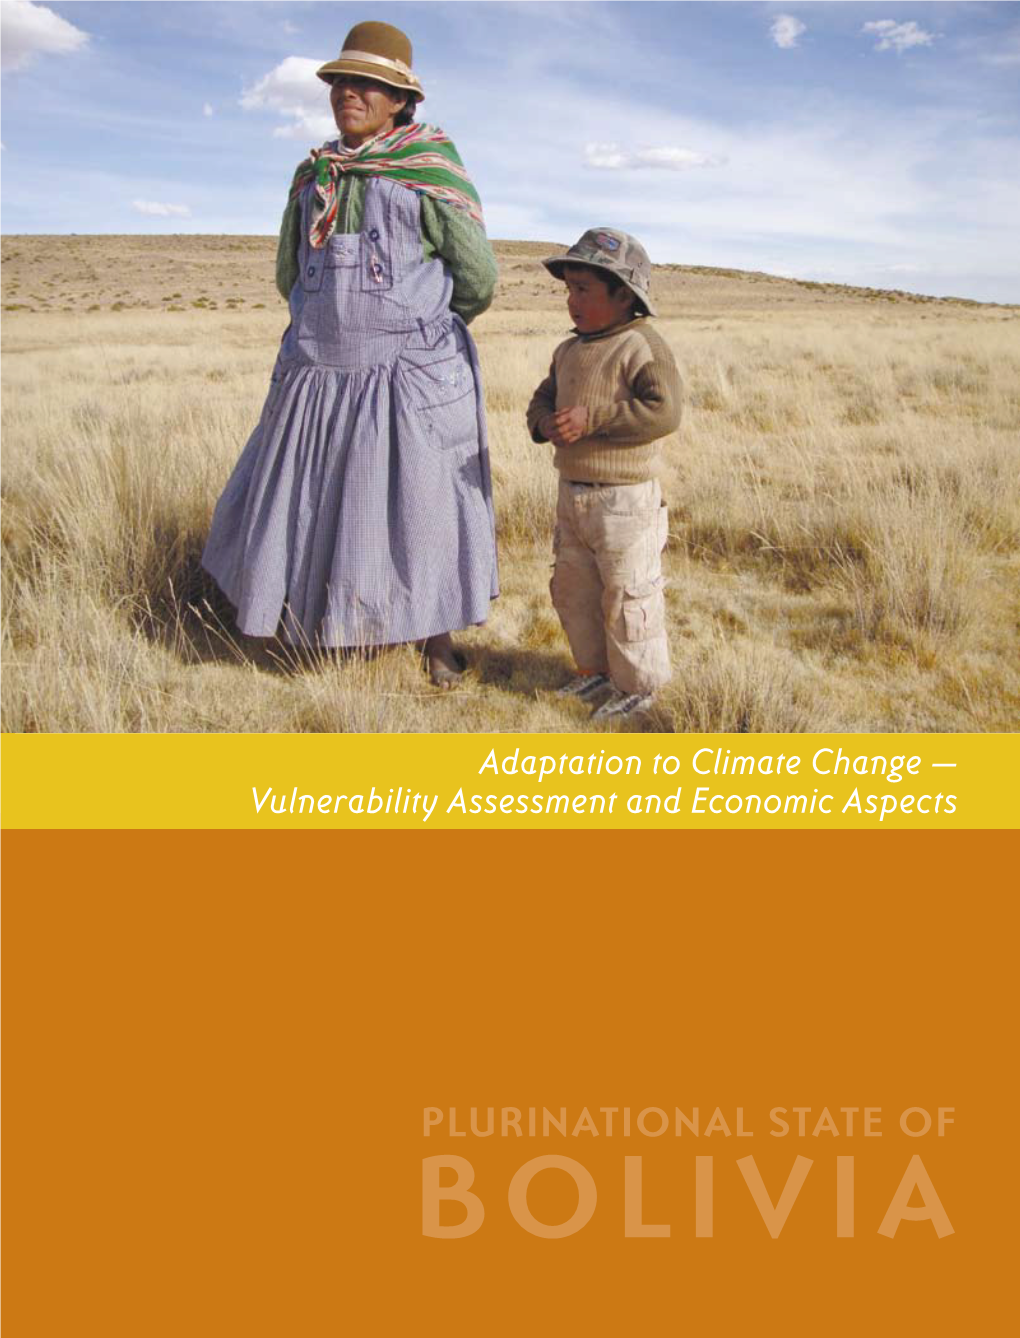 BOLIVIA PLURINATIONAL STATE of Fax: 202 477 6391 BOLIVIA Ii ADAPTATION to CLIMATE CHANGE: VULNERABILITY ASSESSMENT and ECONOMIC ASPECTS